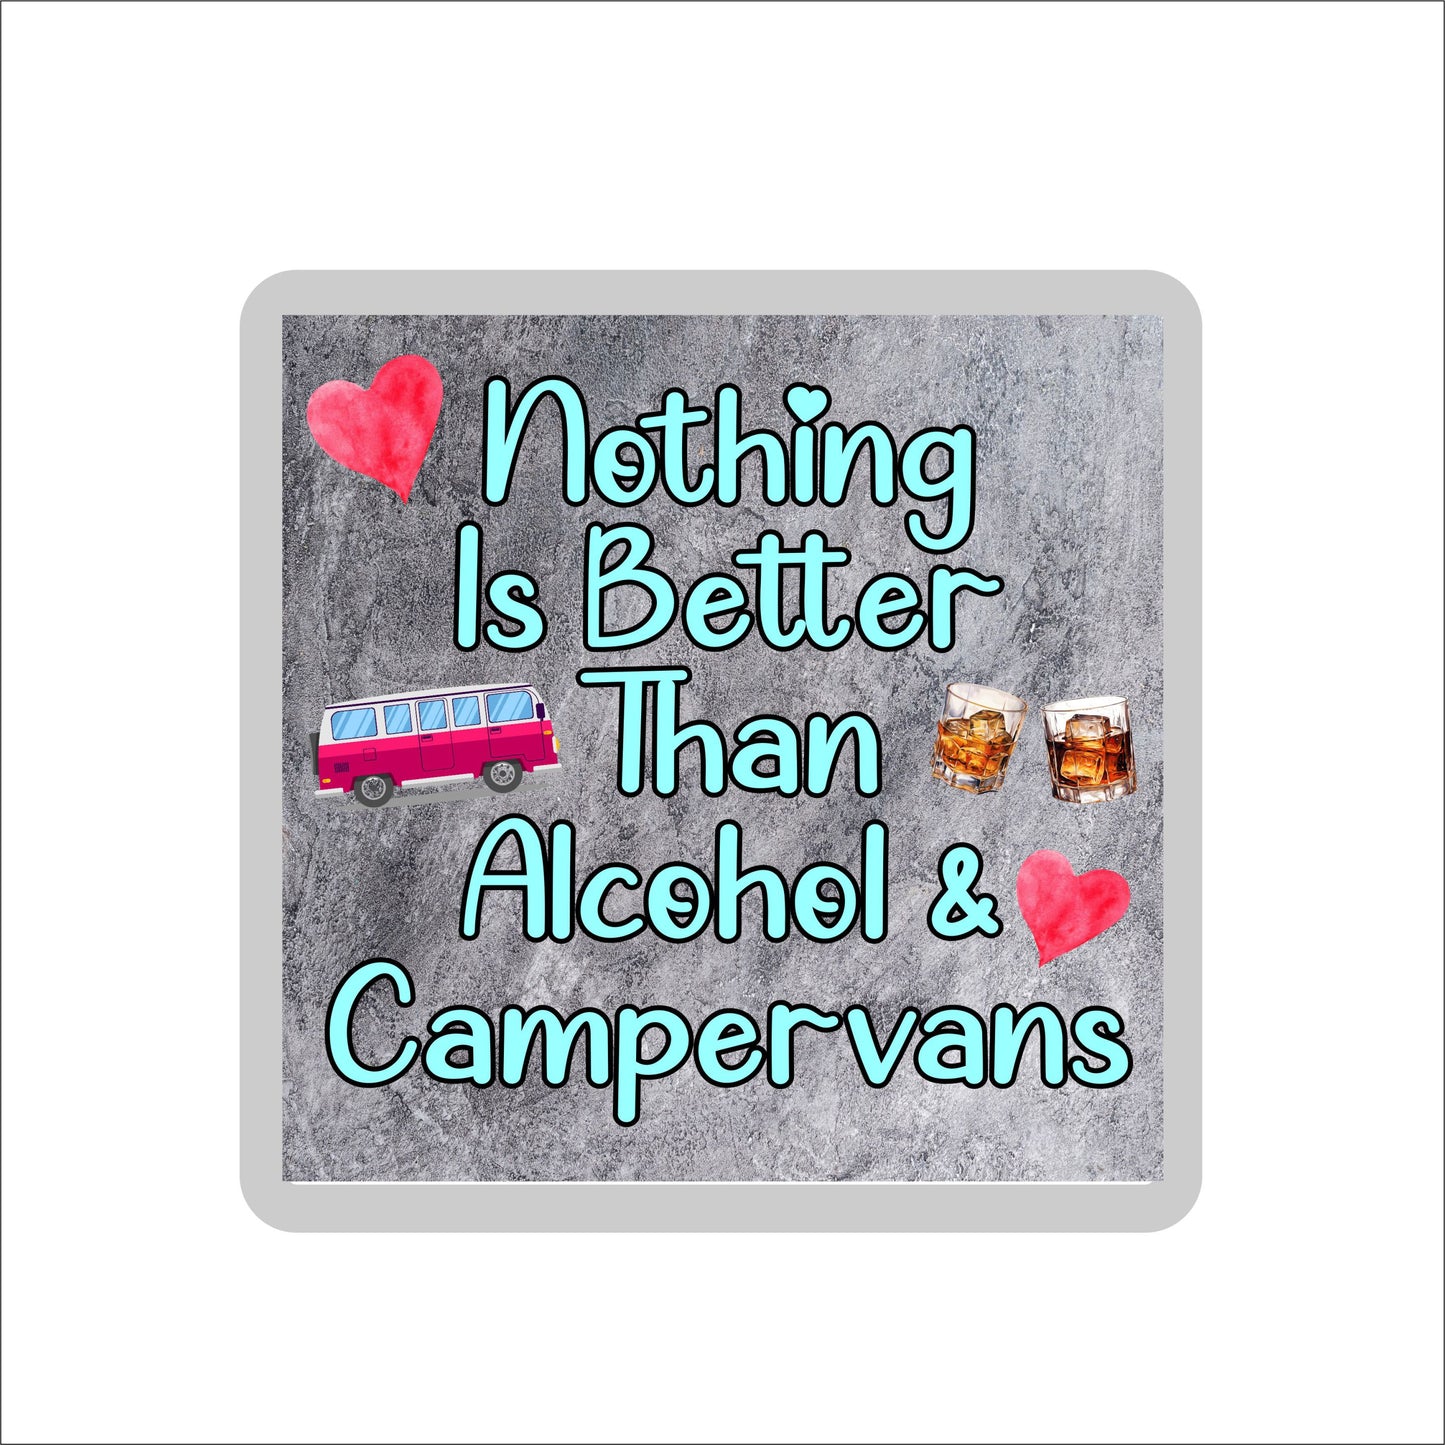 Campervan Coaster Gift - Nothing Is Better Than Alcohol And Campervans - Cute Fun Novelty Birthday Present